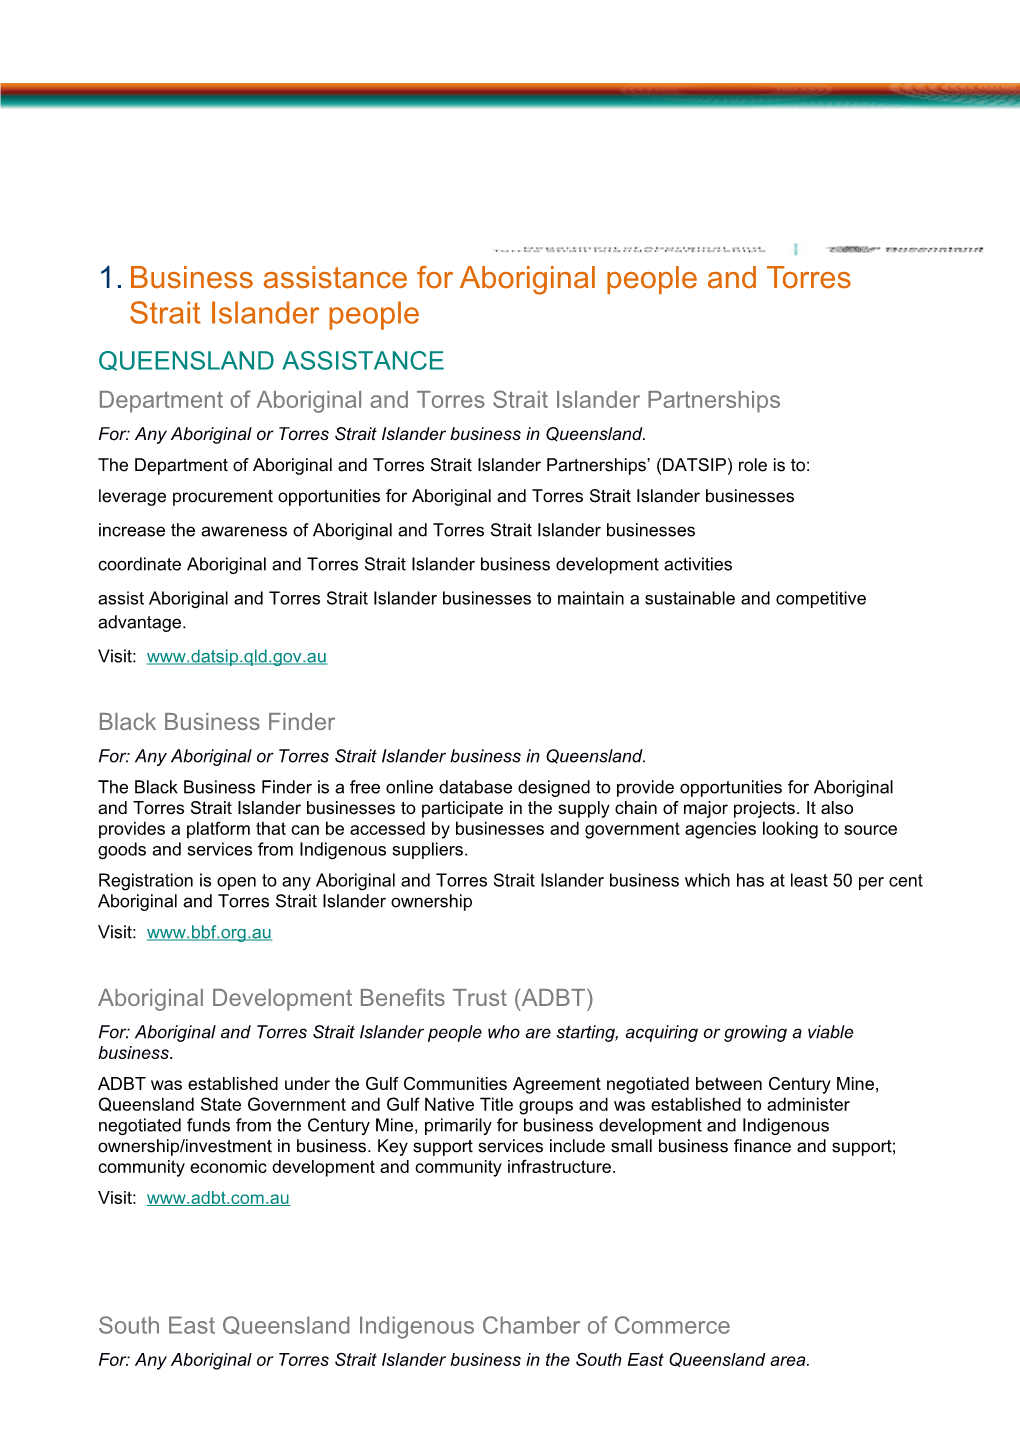 Datsipt Contacts for Aborignal and Torres Strait Islander Businesses